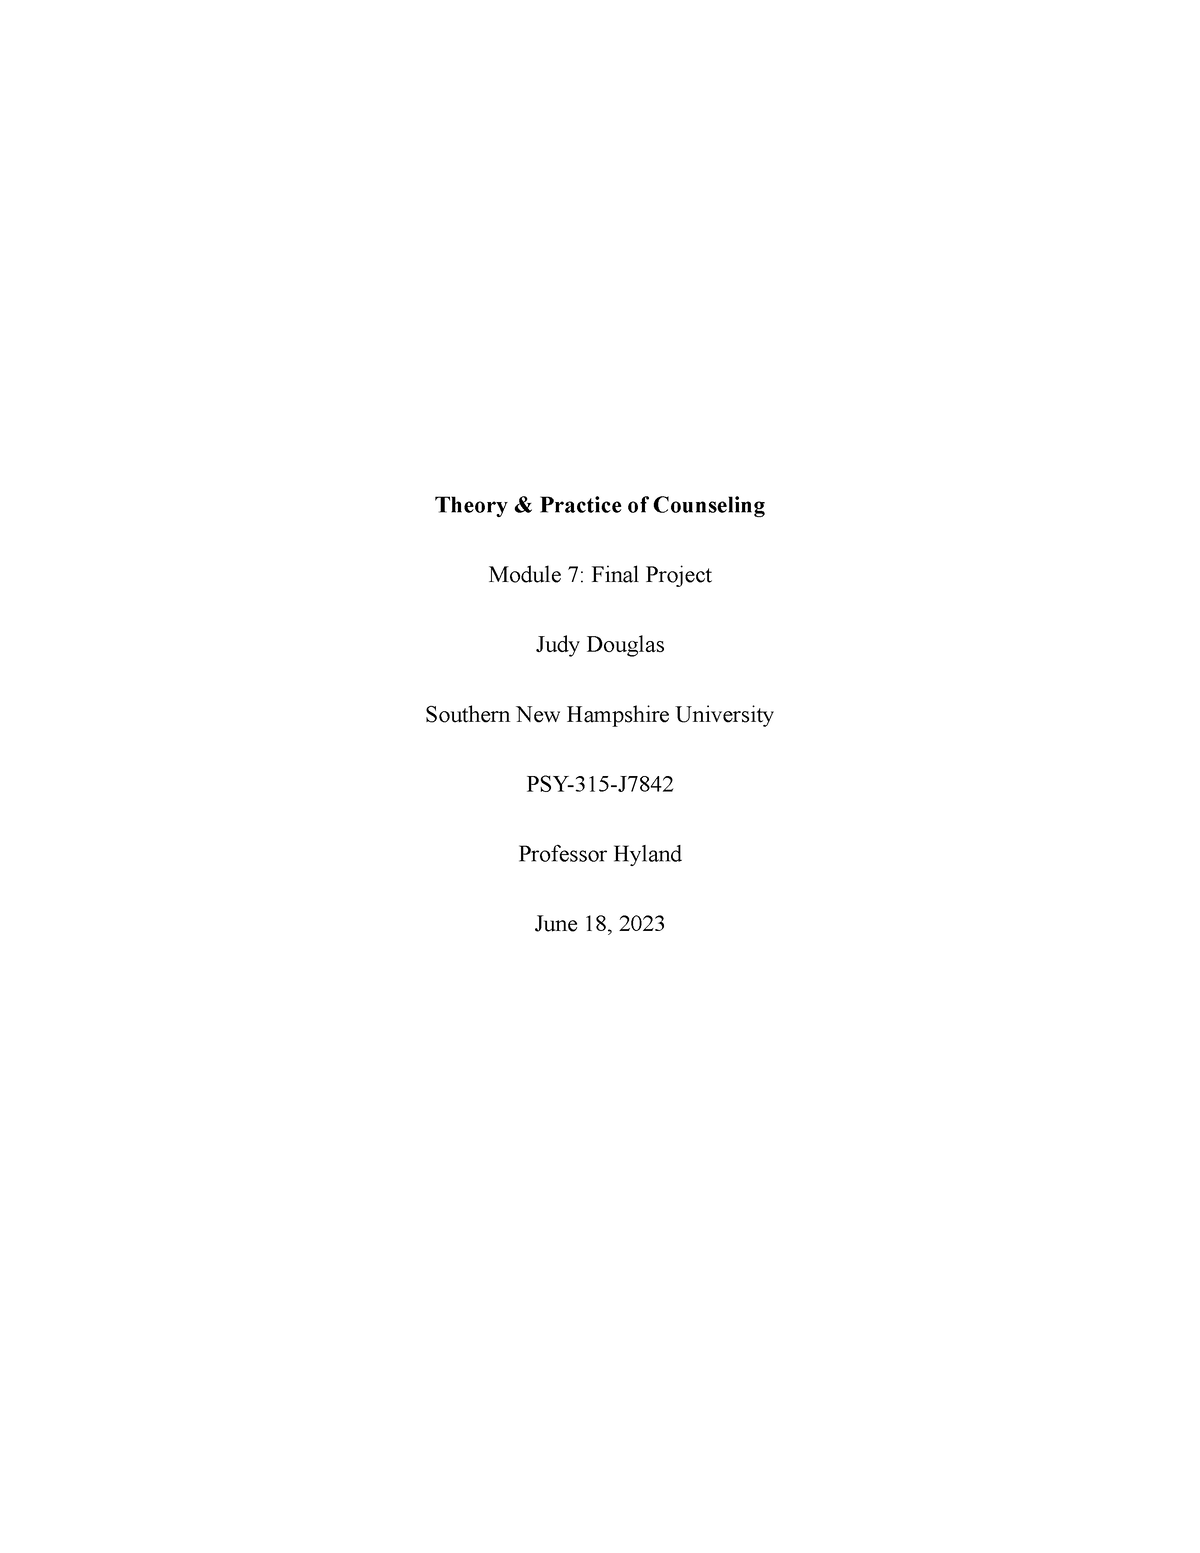 Thearpy 315 Module 7 Final Project - Theory & Practice of Counseling ...